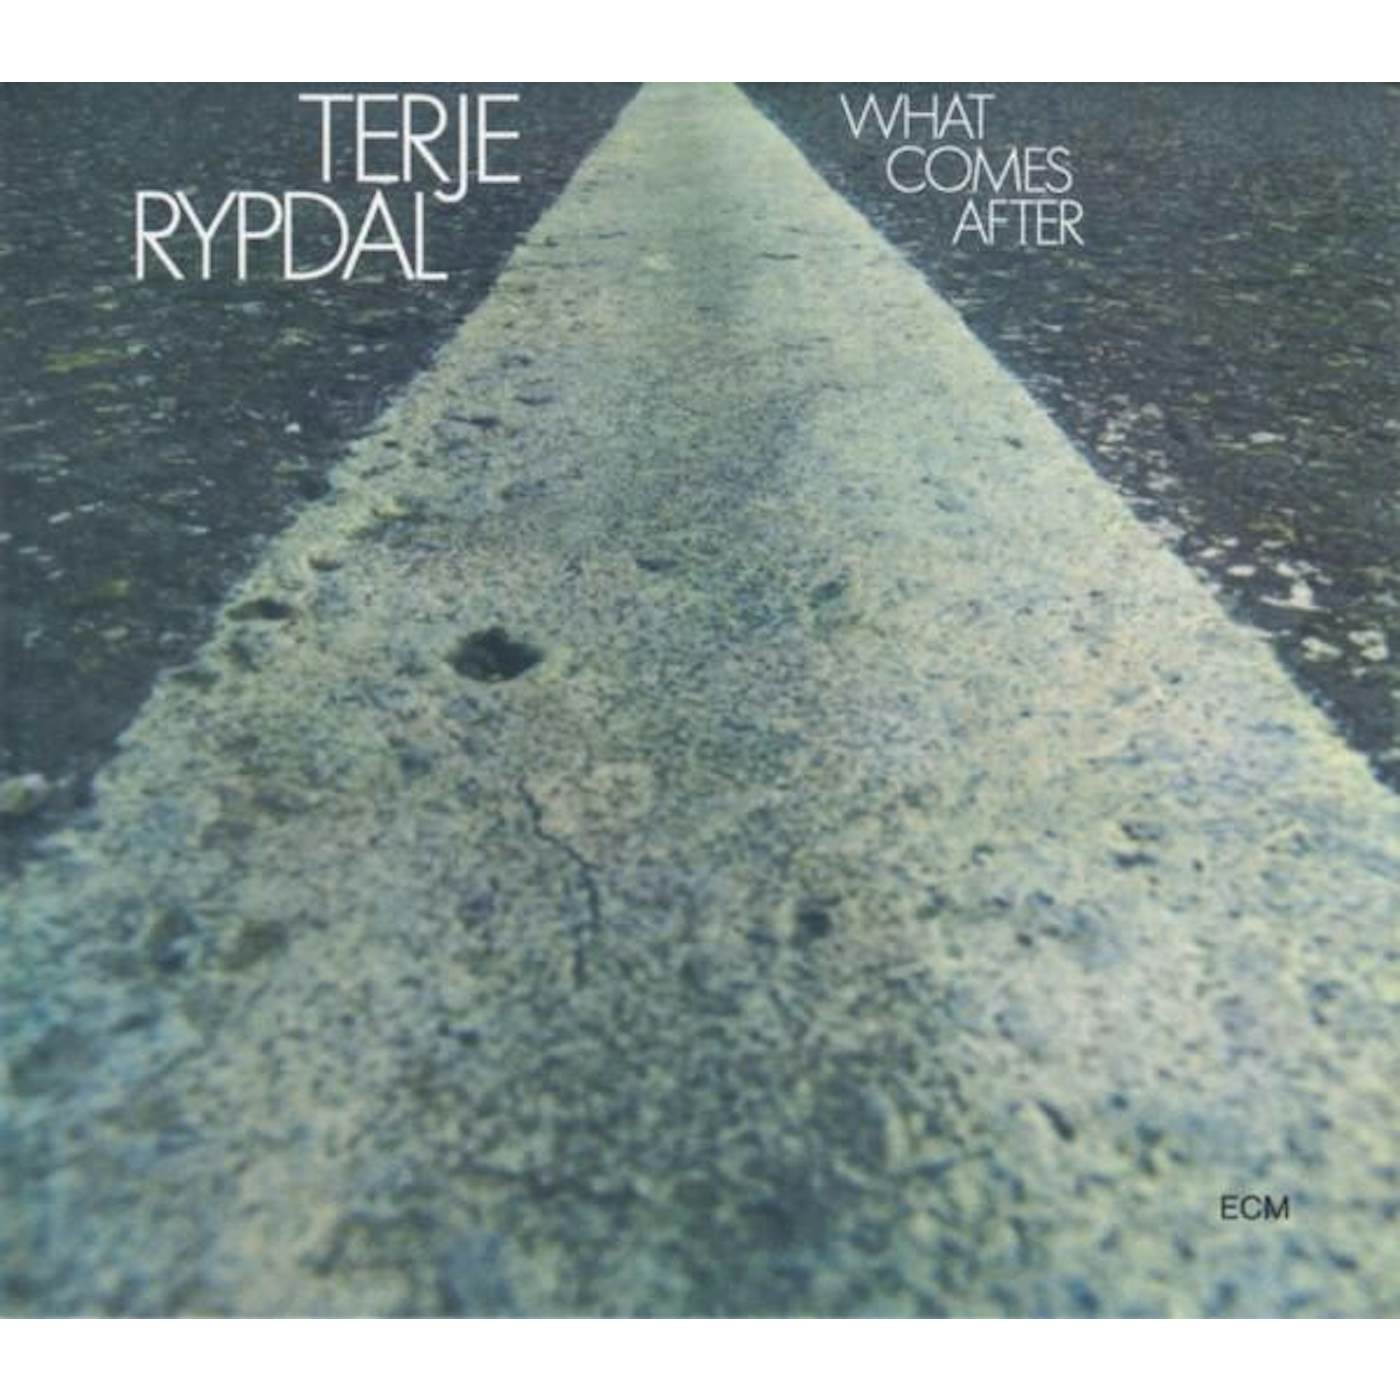 Terje Rypdal WHAT COMES AFTER CD